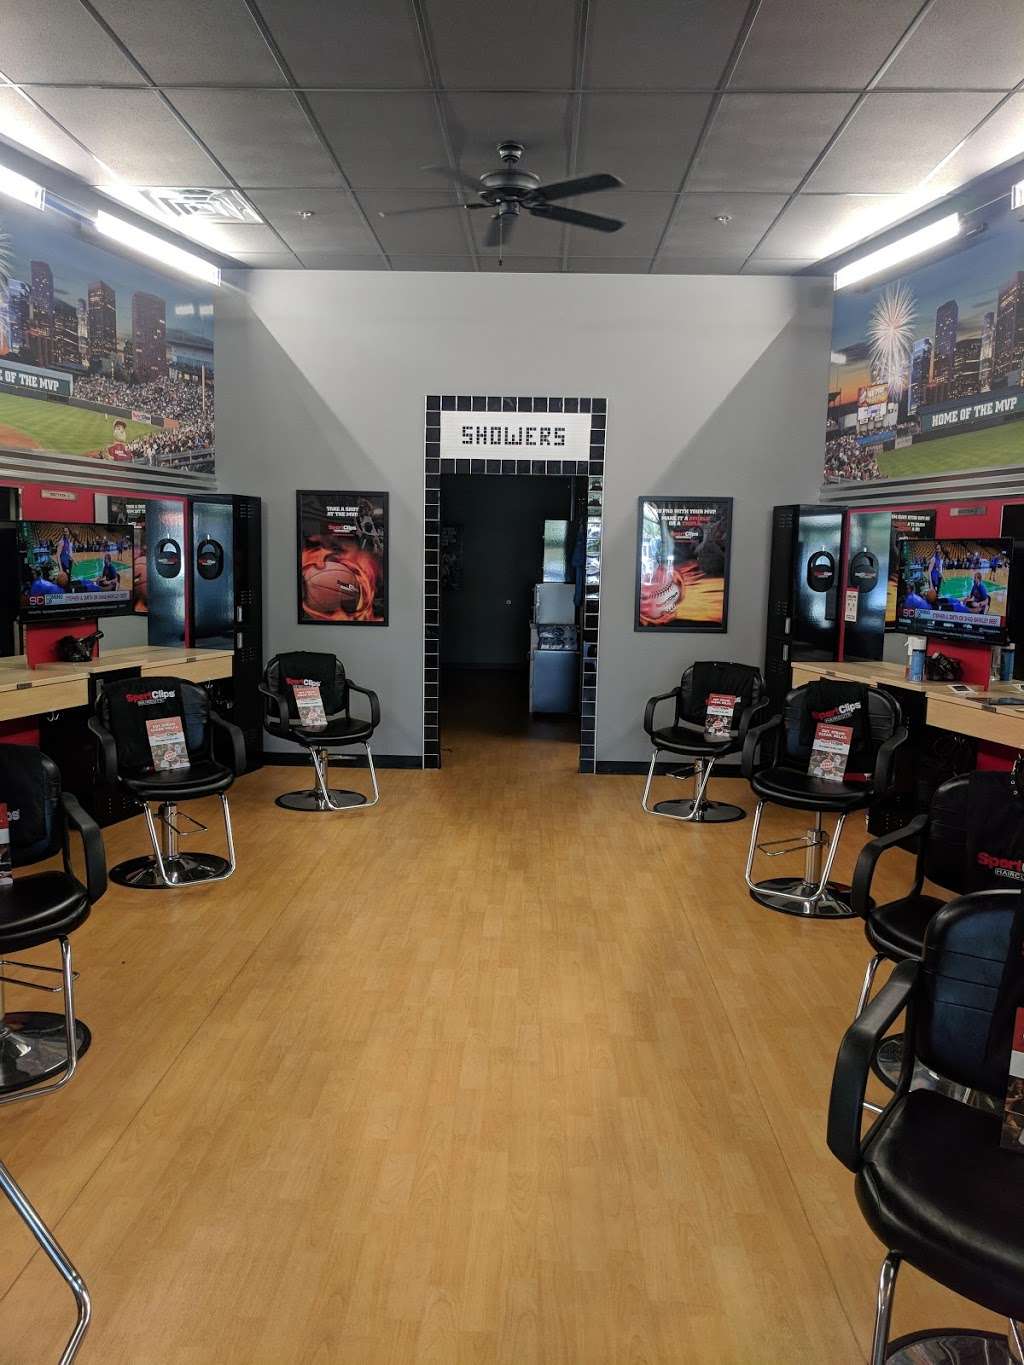 Sport Clips Haircuts of Rancho Mission Viejo | 30763 Gateway Pl Suite C-3, Ladera Ranch, CA 92694, USA | Phone: (949) 478-0522